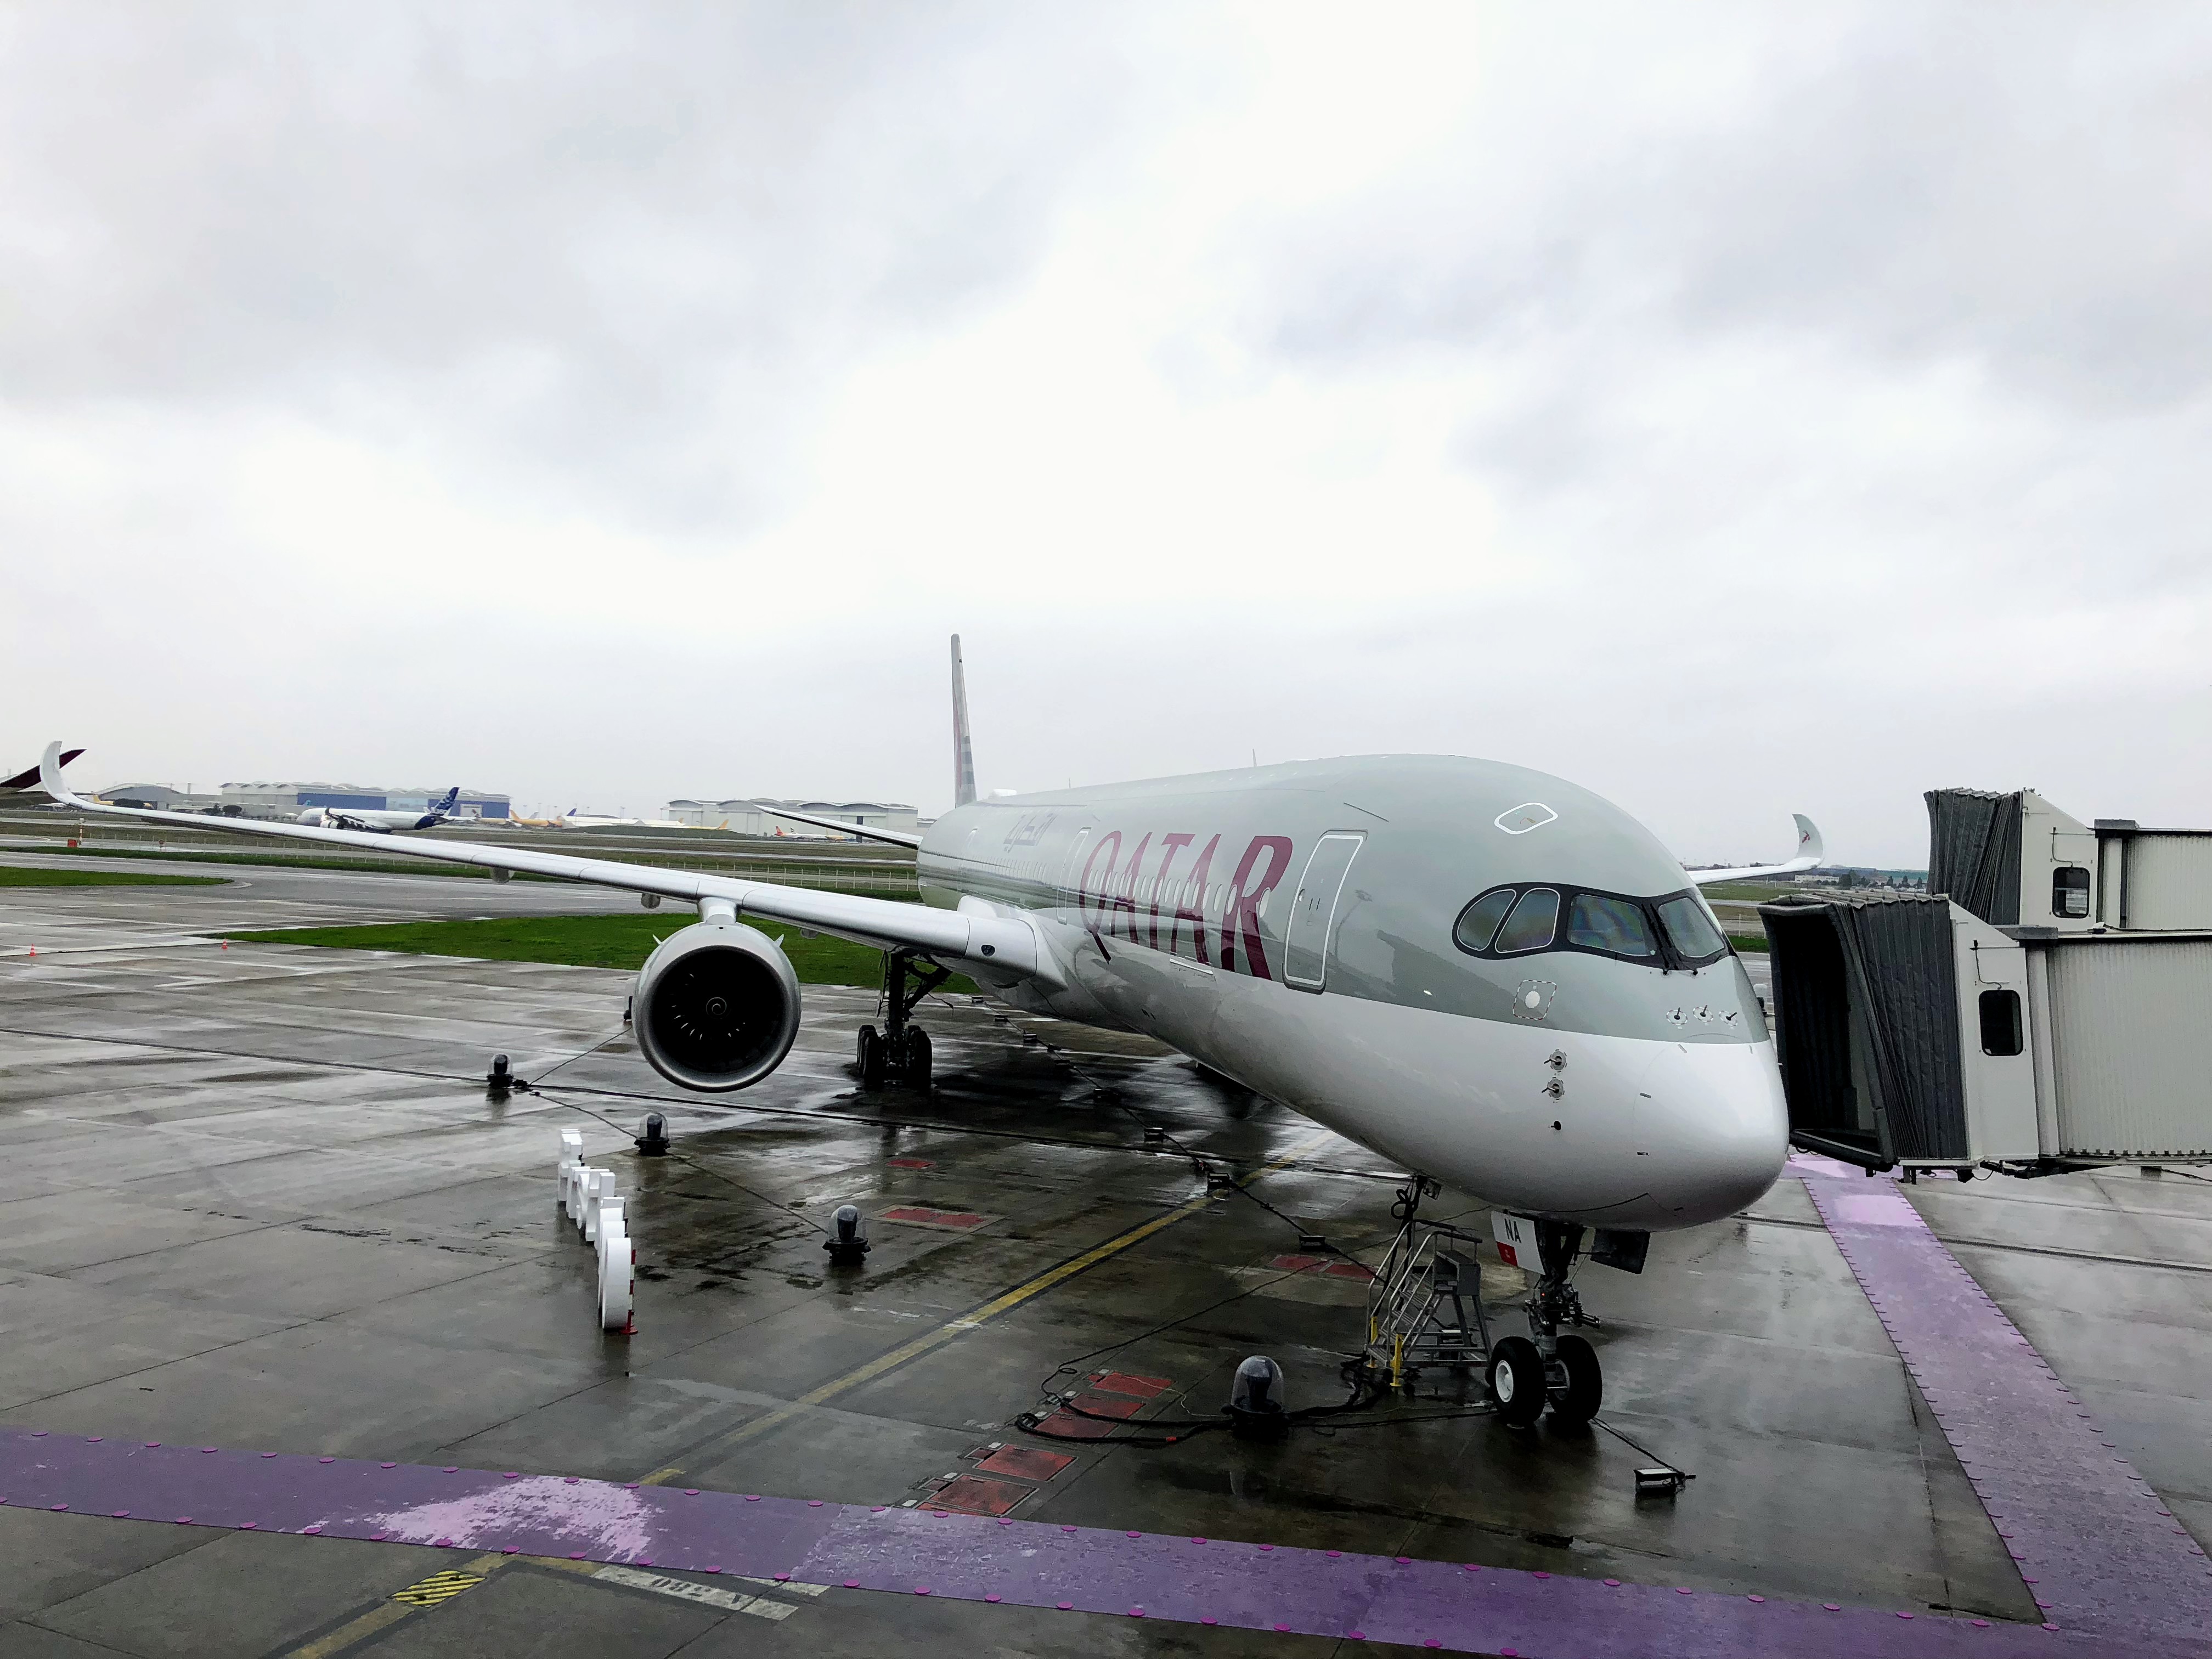 Qatar Airways To Fly The New Airbus A350 1000 To New York, Singapore, Tokyo From A Lounge